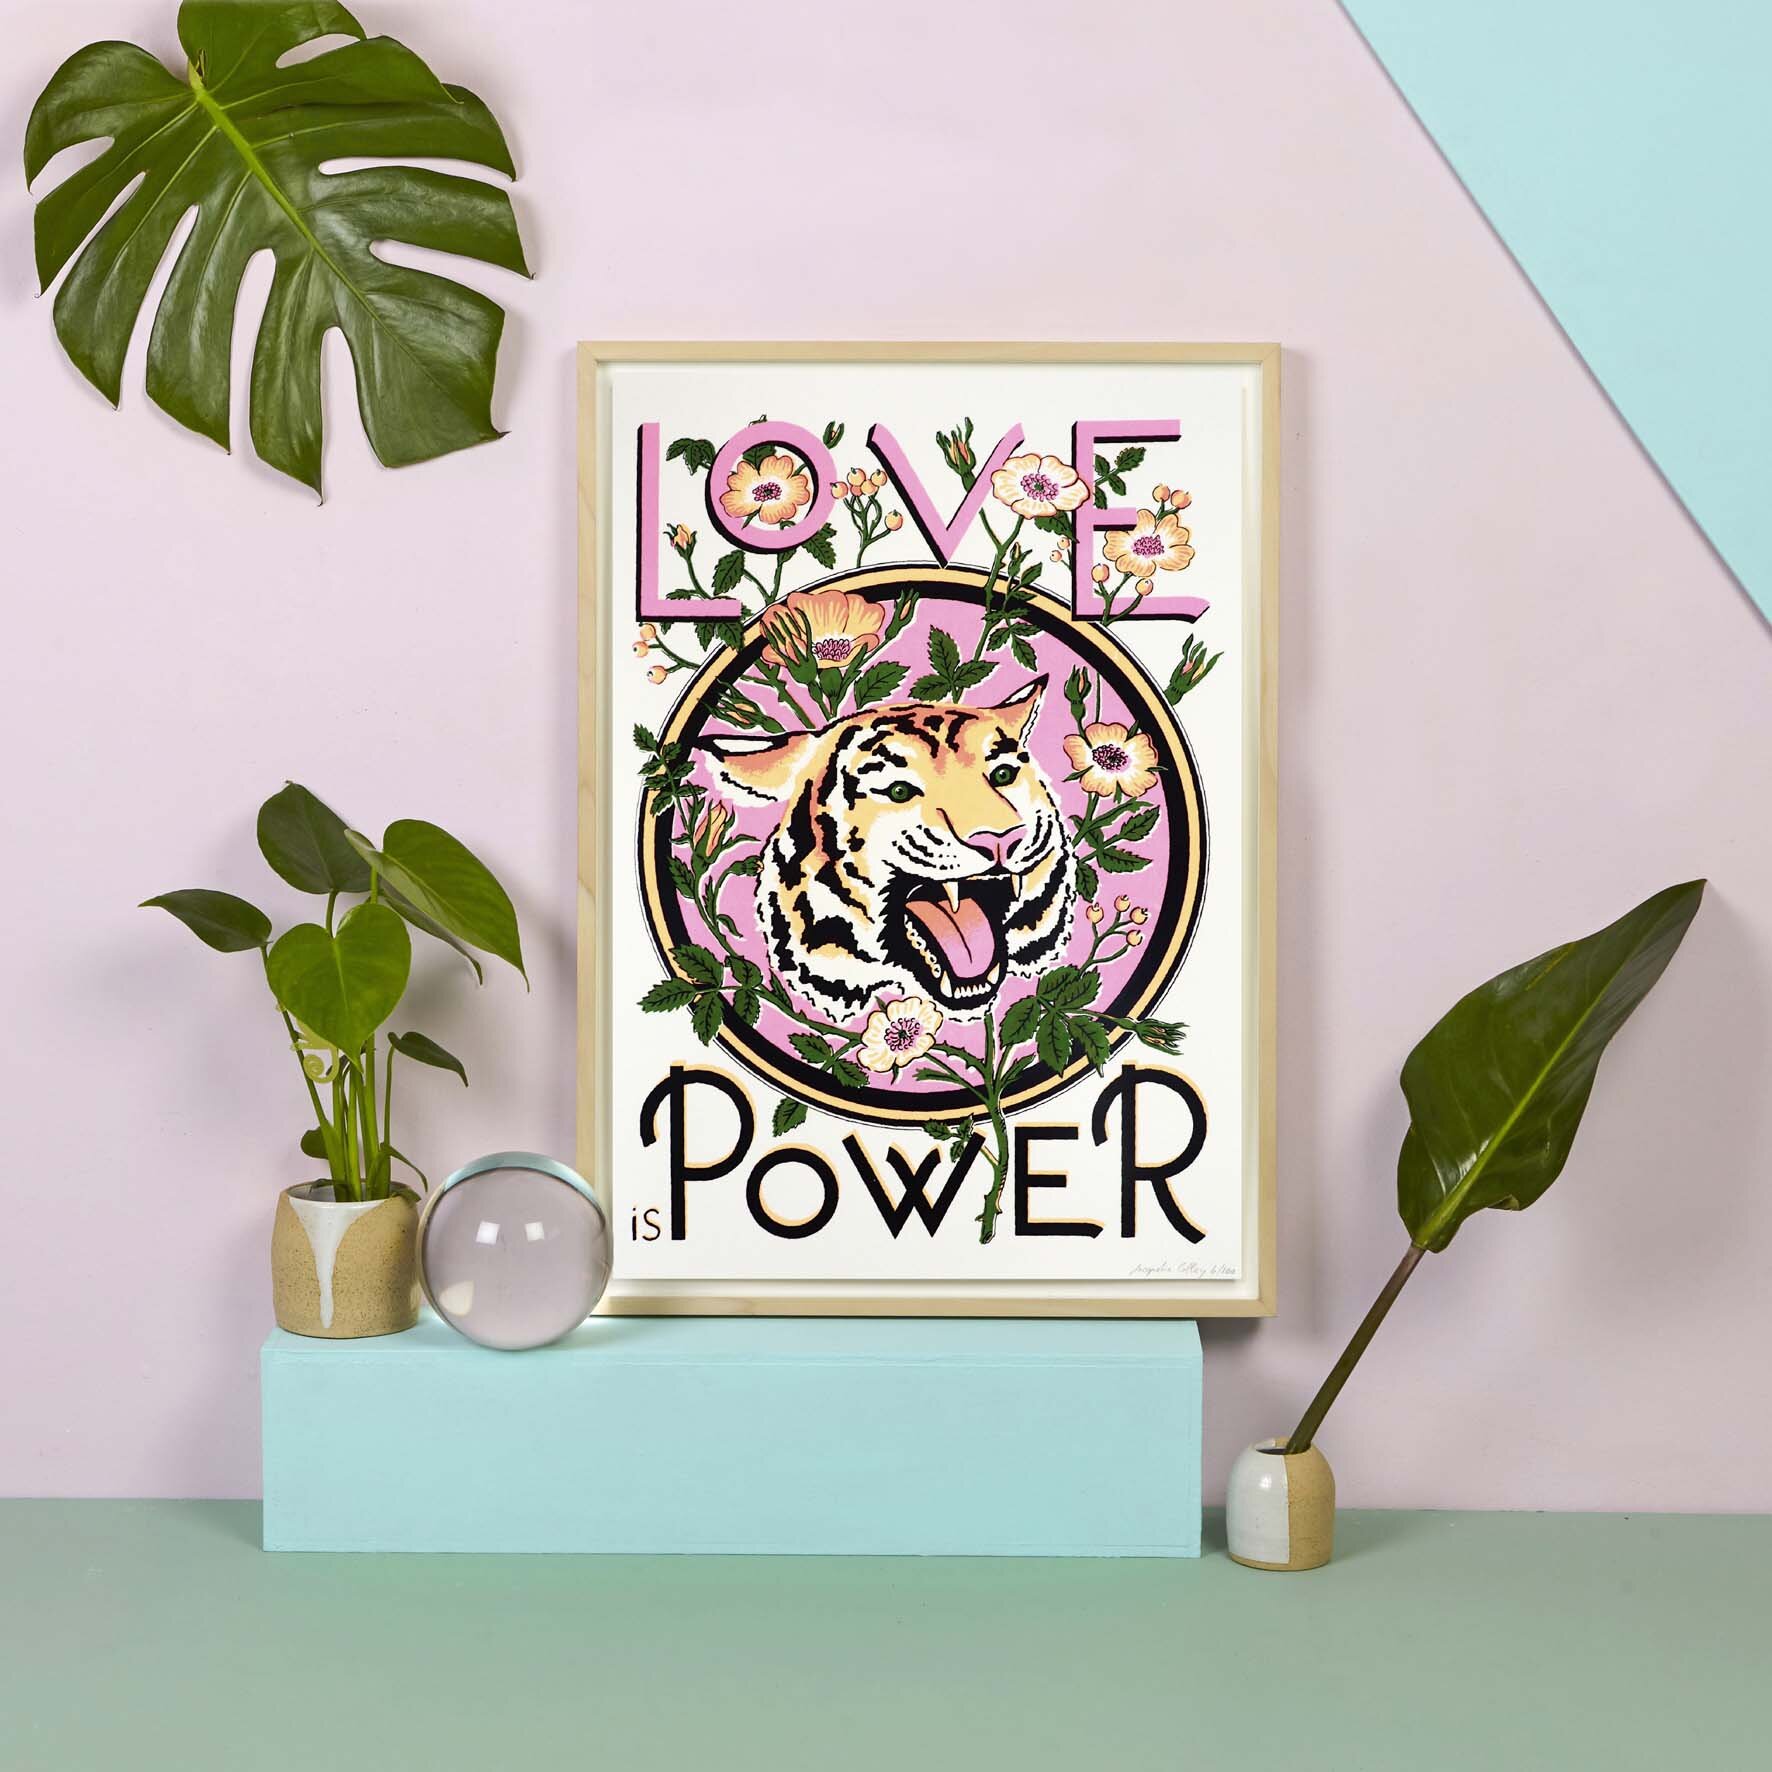 A2-Lifestyle-Love-Is-Power-Screen-Print-Jacqueline-Colley-1sm.jpg